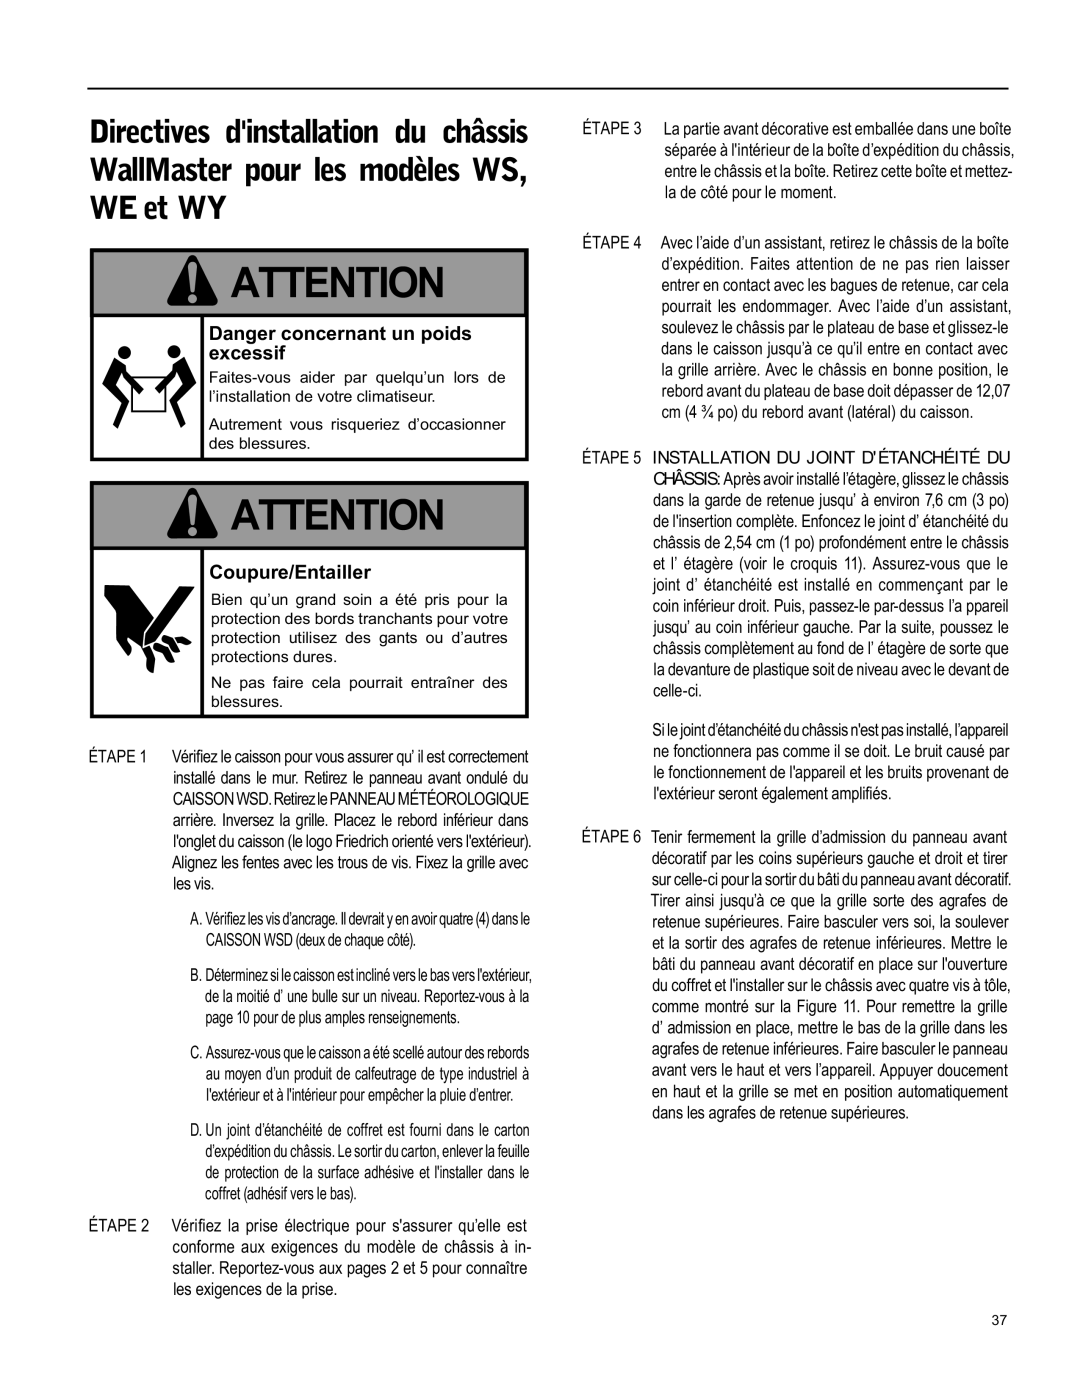 Friedrich WY09, WY12, WS12 operation manual Danger concernant un poids excessif, Coupure/Entailler 